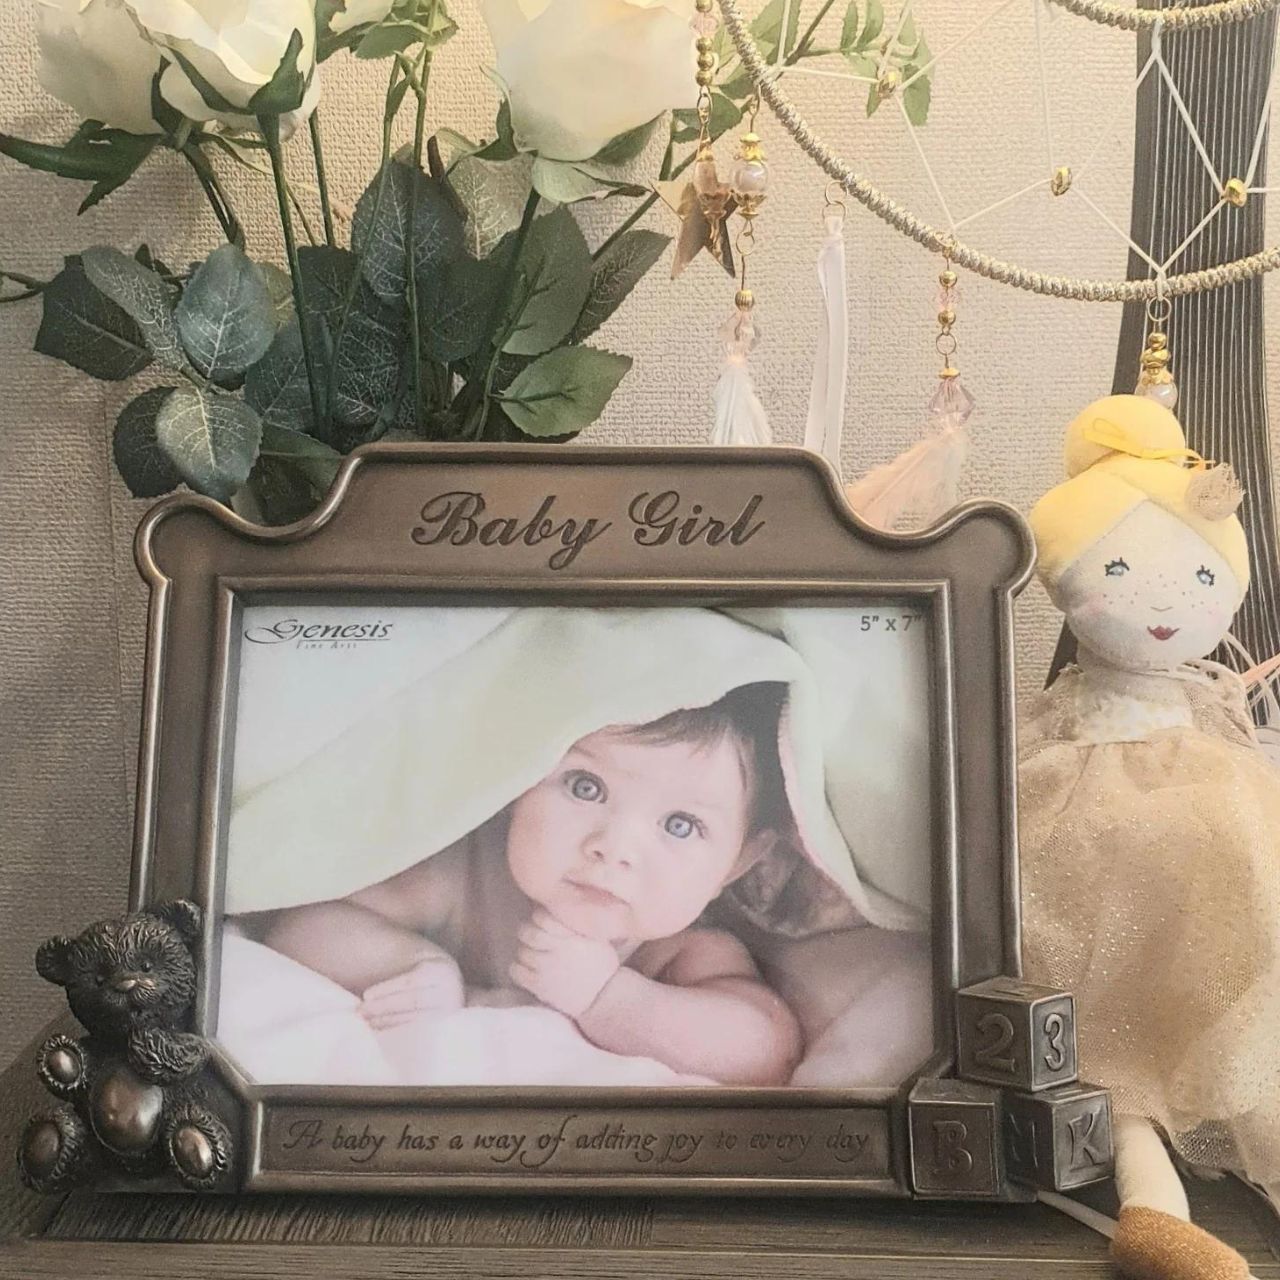 This beautiful photo frame comes with the message inscribed on the front ; "A baby has a way of adding joy to every day." The perfect gift for a new arrival or christening. It holds 5 x 7 photos, and is made of cold cast bronze, measuring,  overall 7" x 9''.